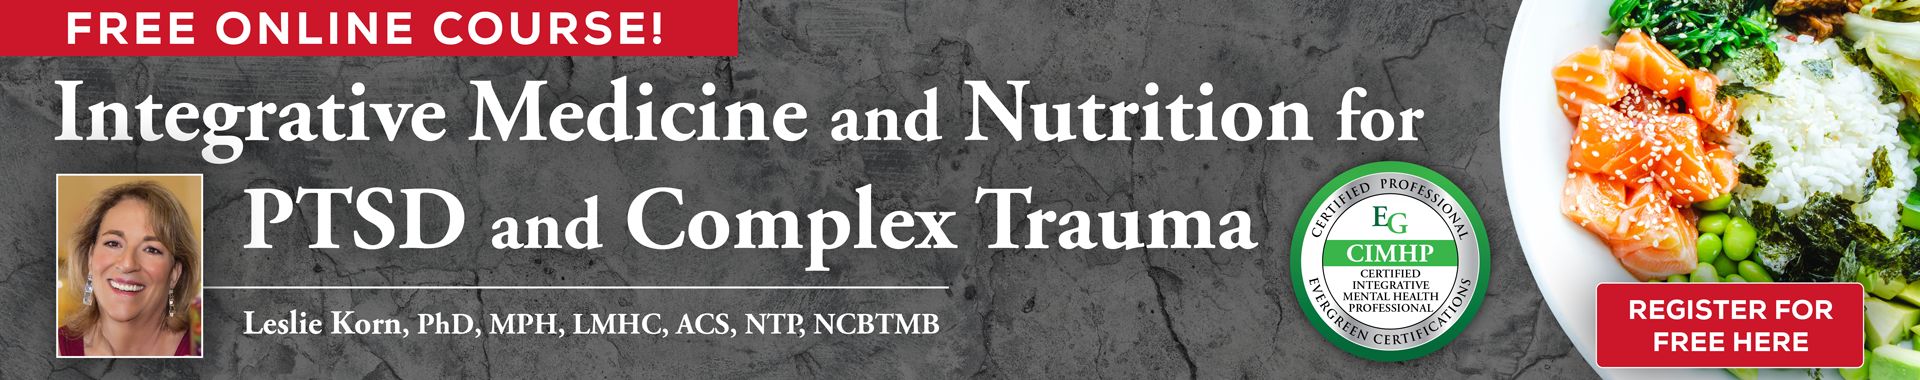 FREE Course! | Integrative Medicine and Nutrition for PTSD and Complex Trauma Certification Course